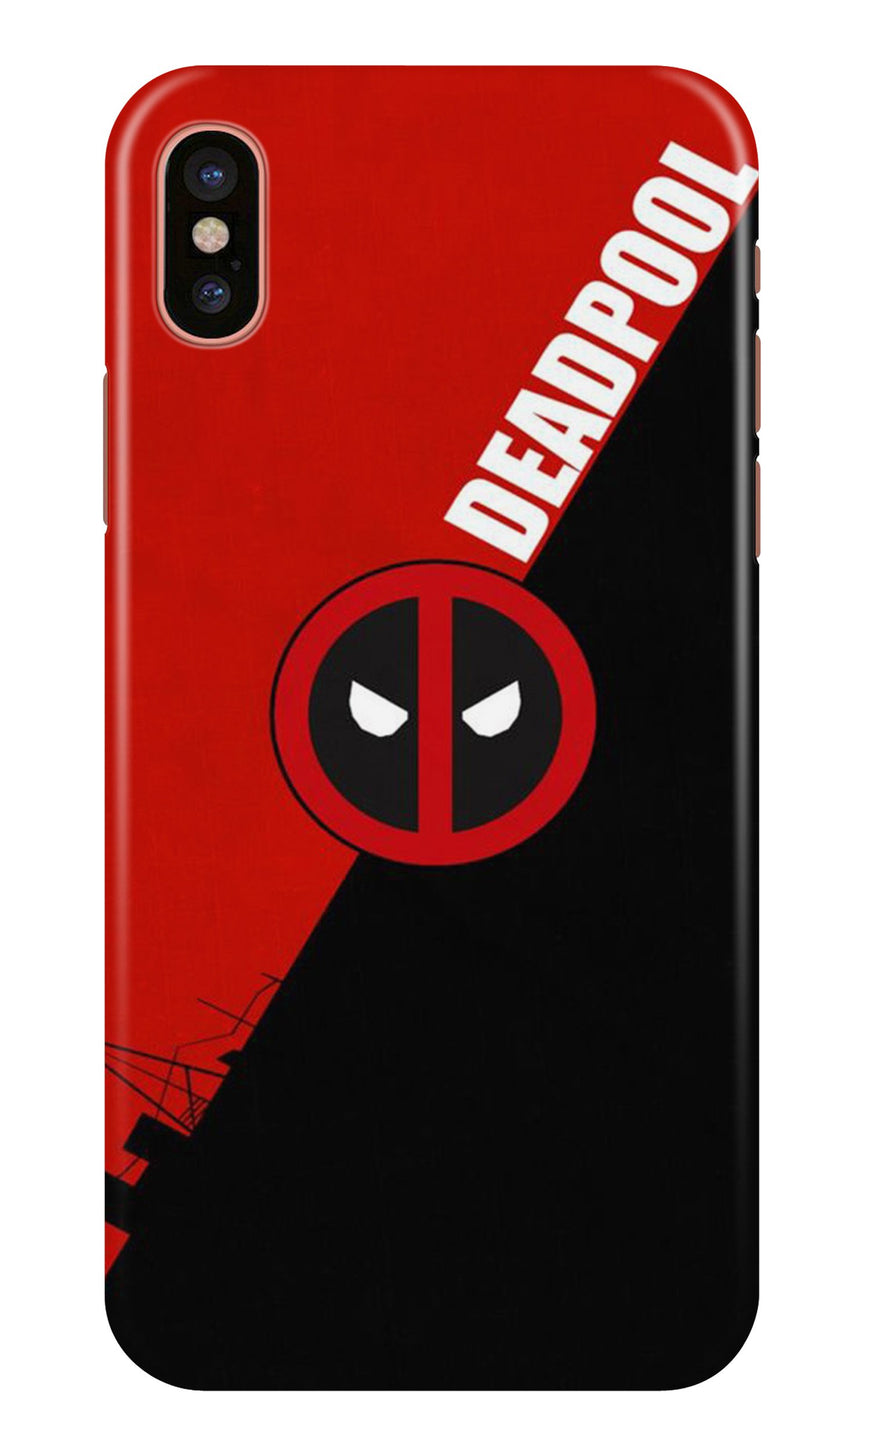 Deadpool Case for iPhone Xs Max (Design No. 248)